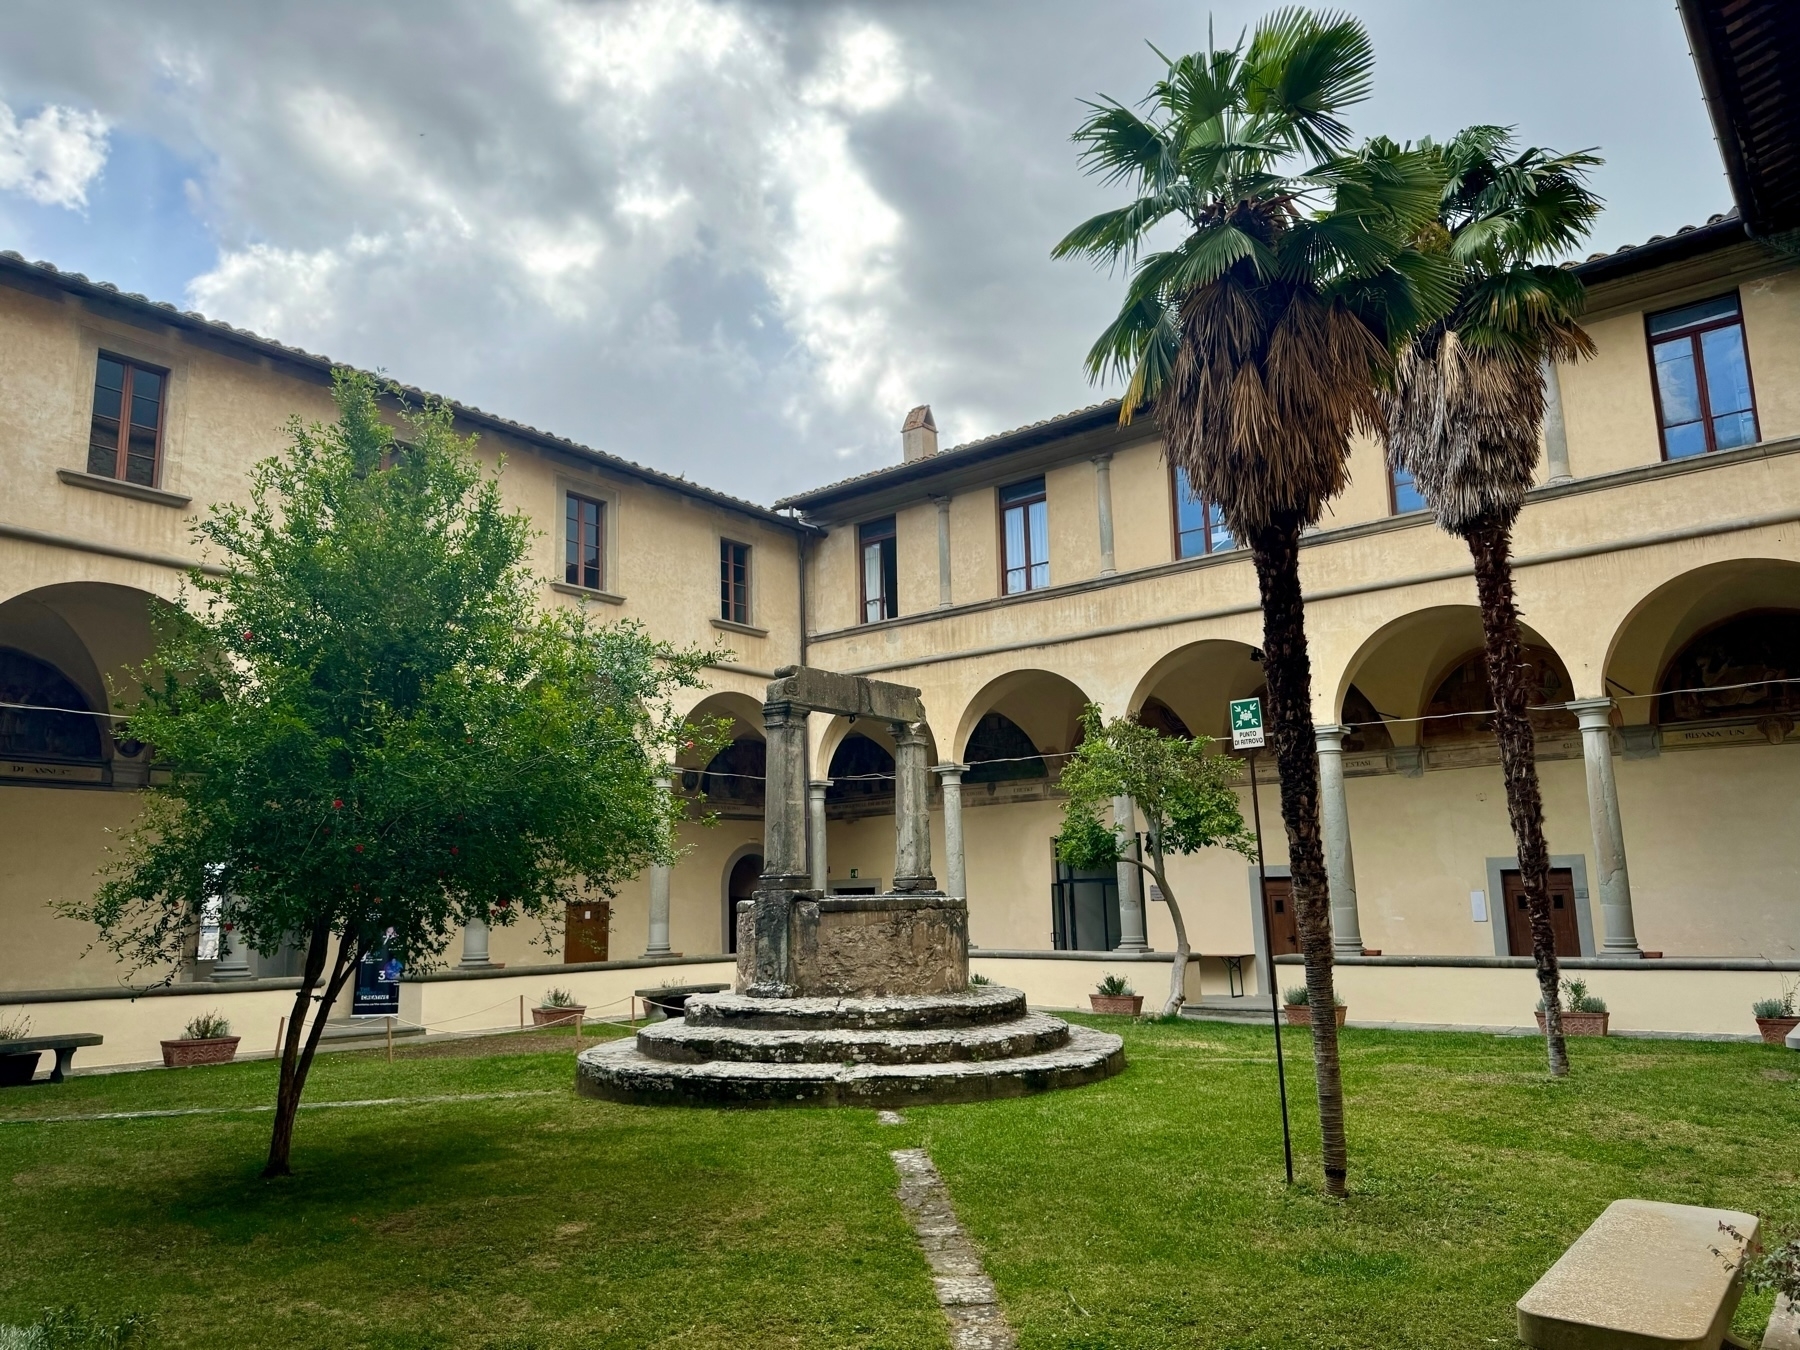 A peaceful courtyard featuring a central stone well surrounded by a grassy area with a tree and two tall palms. The courtyard is bordered by a two-story building with arched walkways and multiple windows. The sky above is partly cloudy.